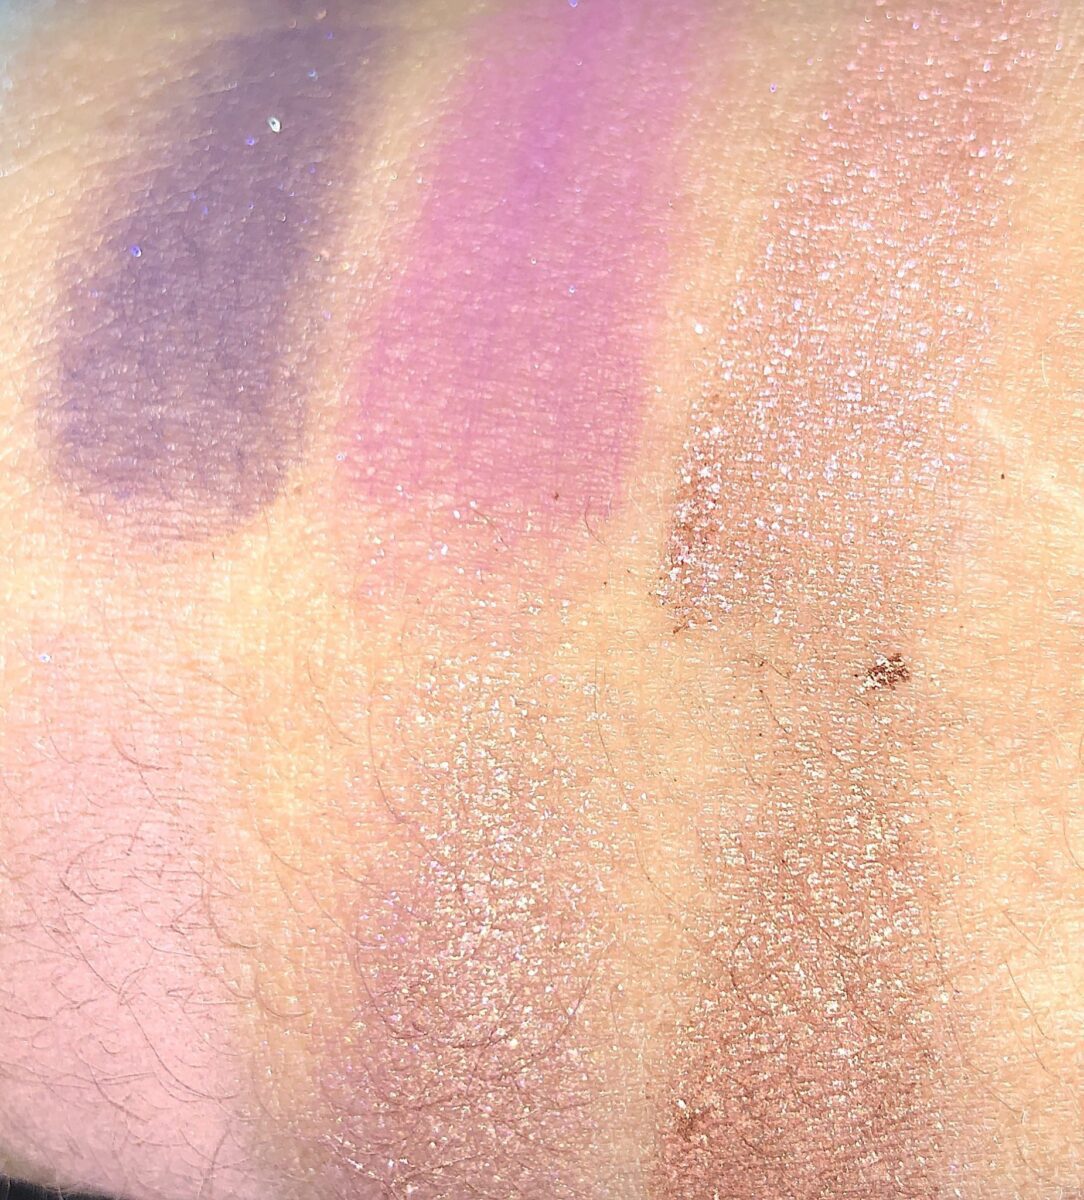 ROW 3 SWATCHES - ON TOP ARE VORTEX, HOT MESS, AND . SUPERNOVA, ON BOTTOM AREKARMA, GOLD GLITCH, AND FRAZZLED